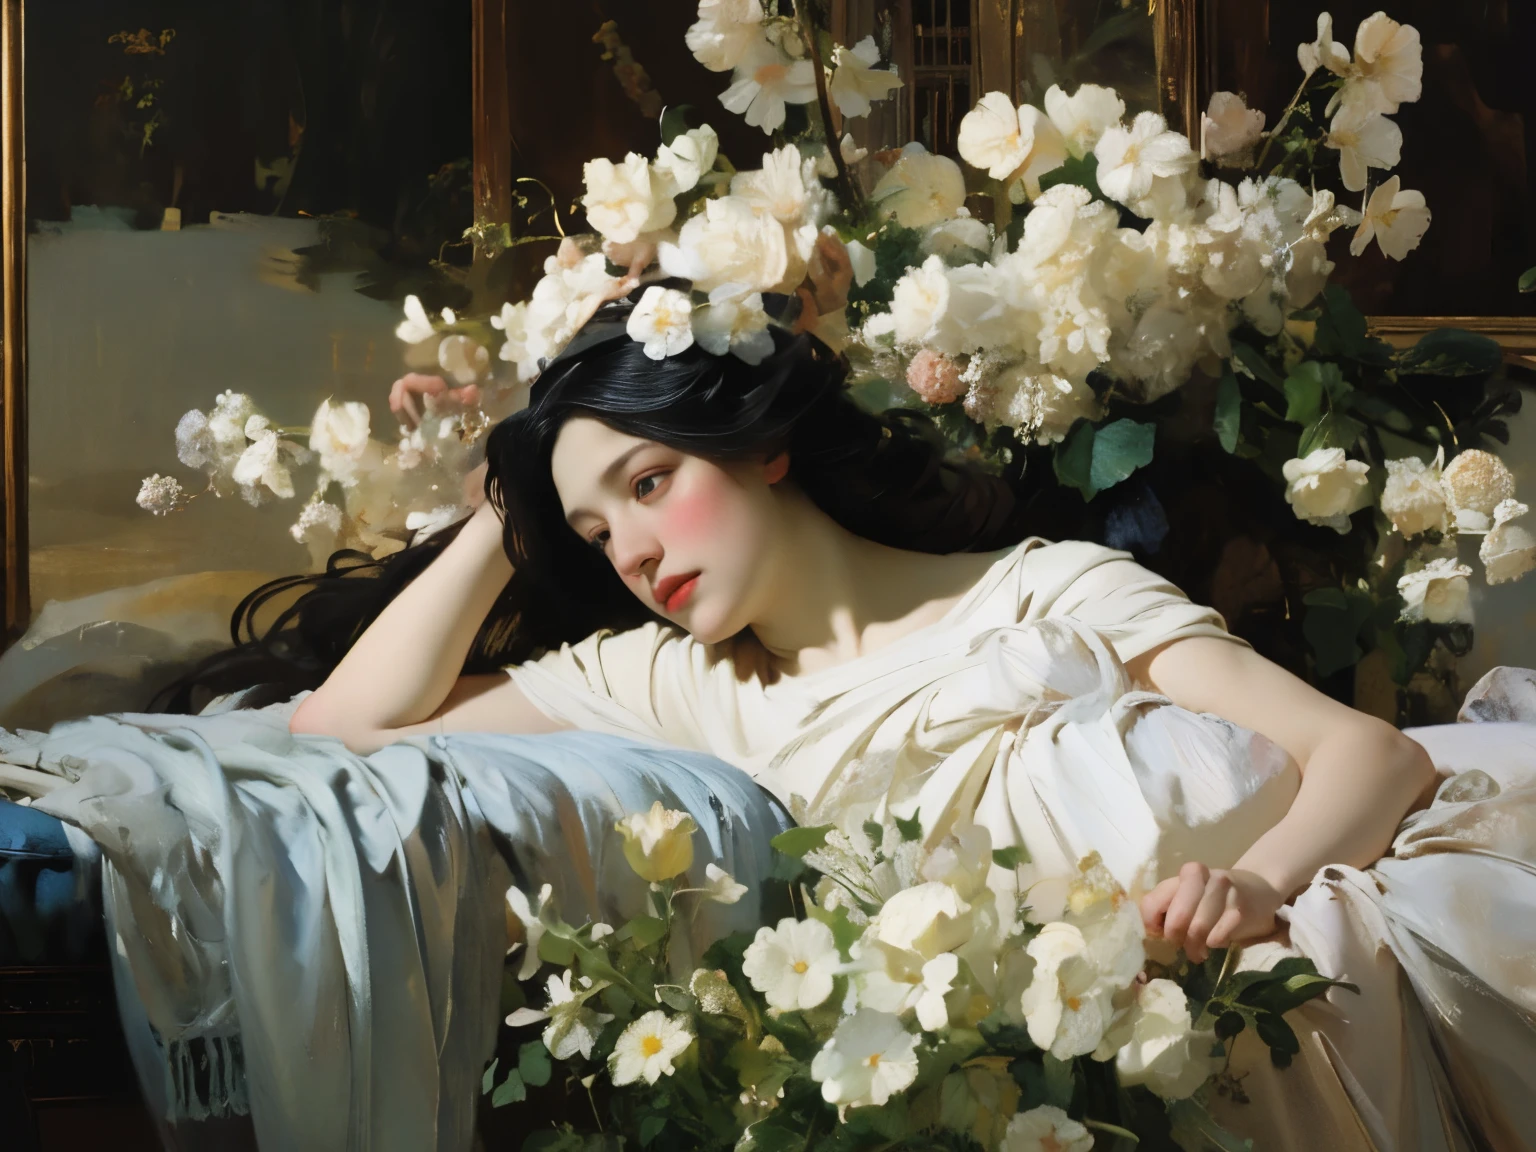 (oil painting:1.5),
\\
a woman with long black hair and white flowers in her hair is laying down in a field of white flowers, (amy sol:0.248), (stanley artgerm lau:0.106), (a detailed painting:0.353), (gothic art:0.106) golden abstract expressionism and the museum of art 